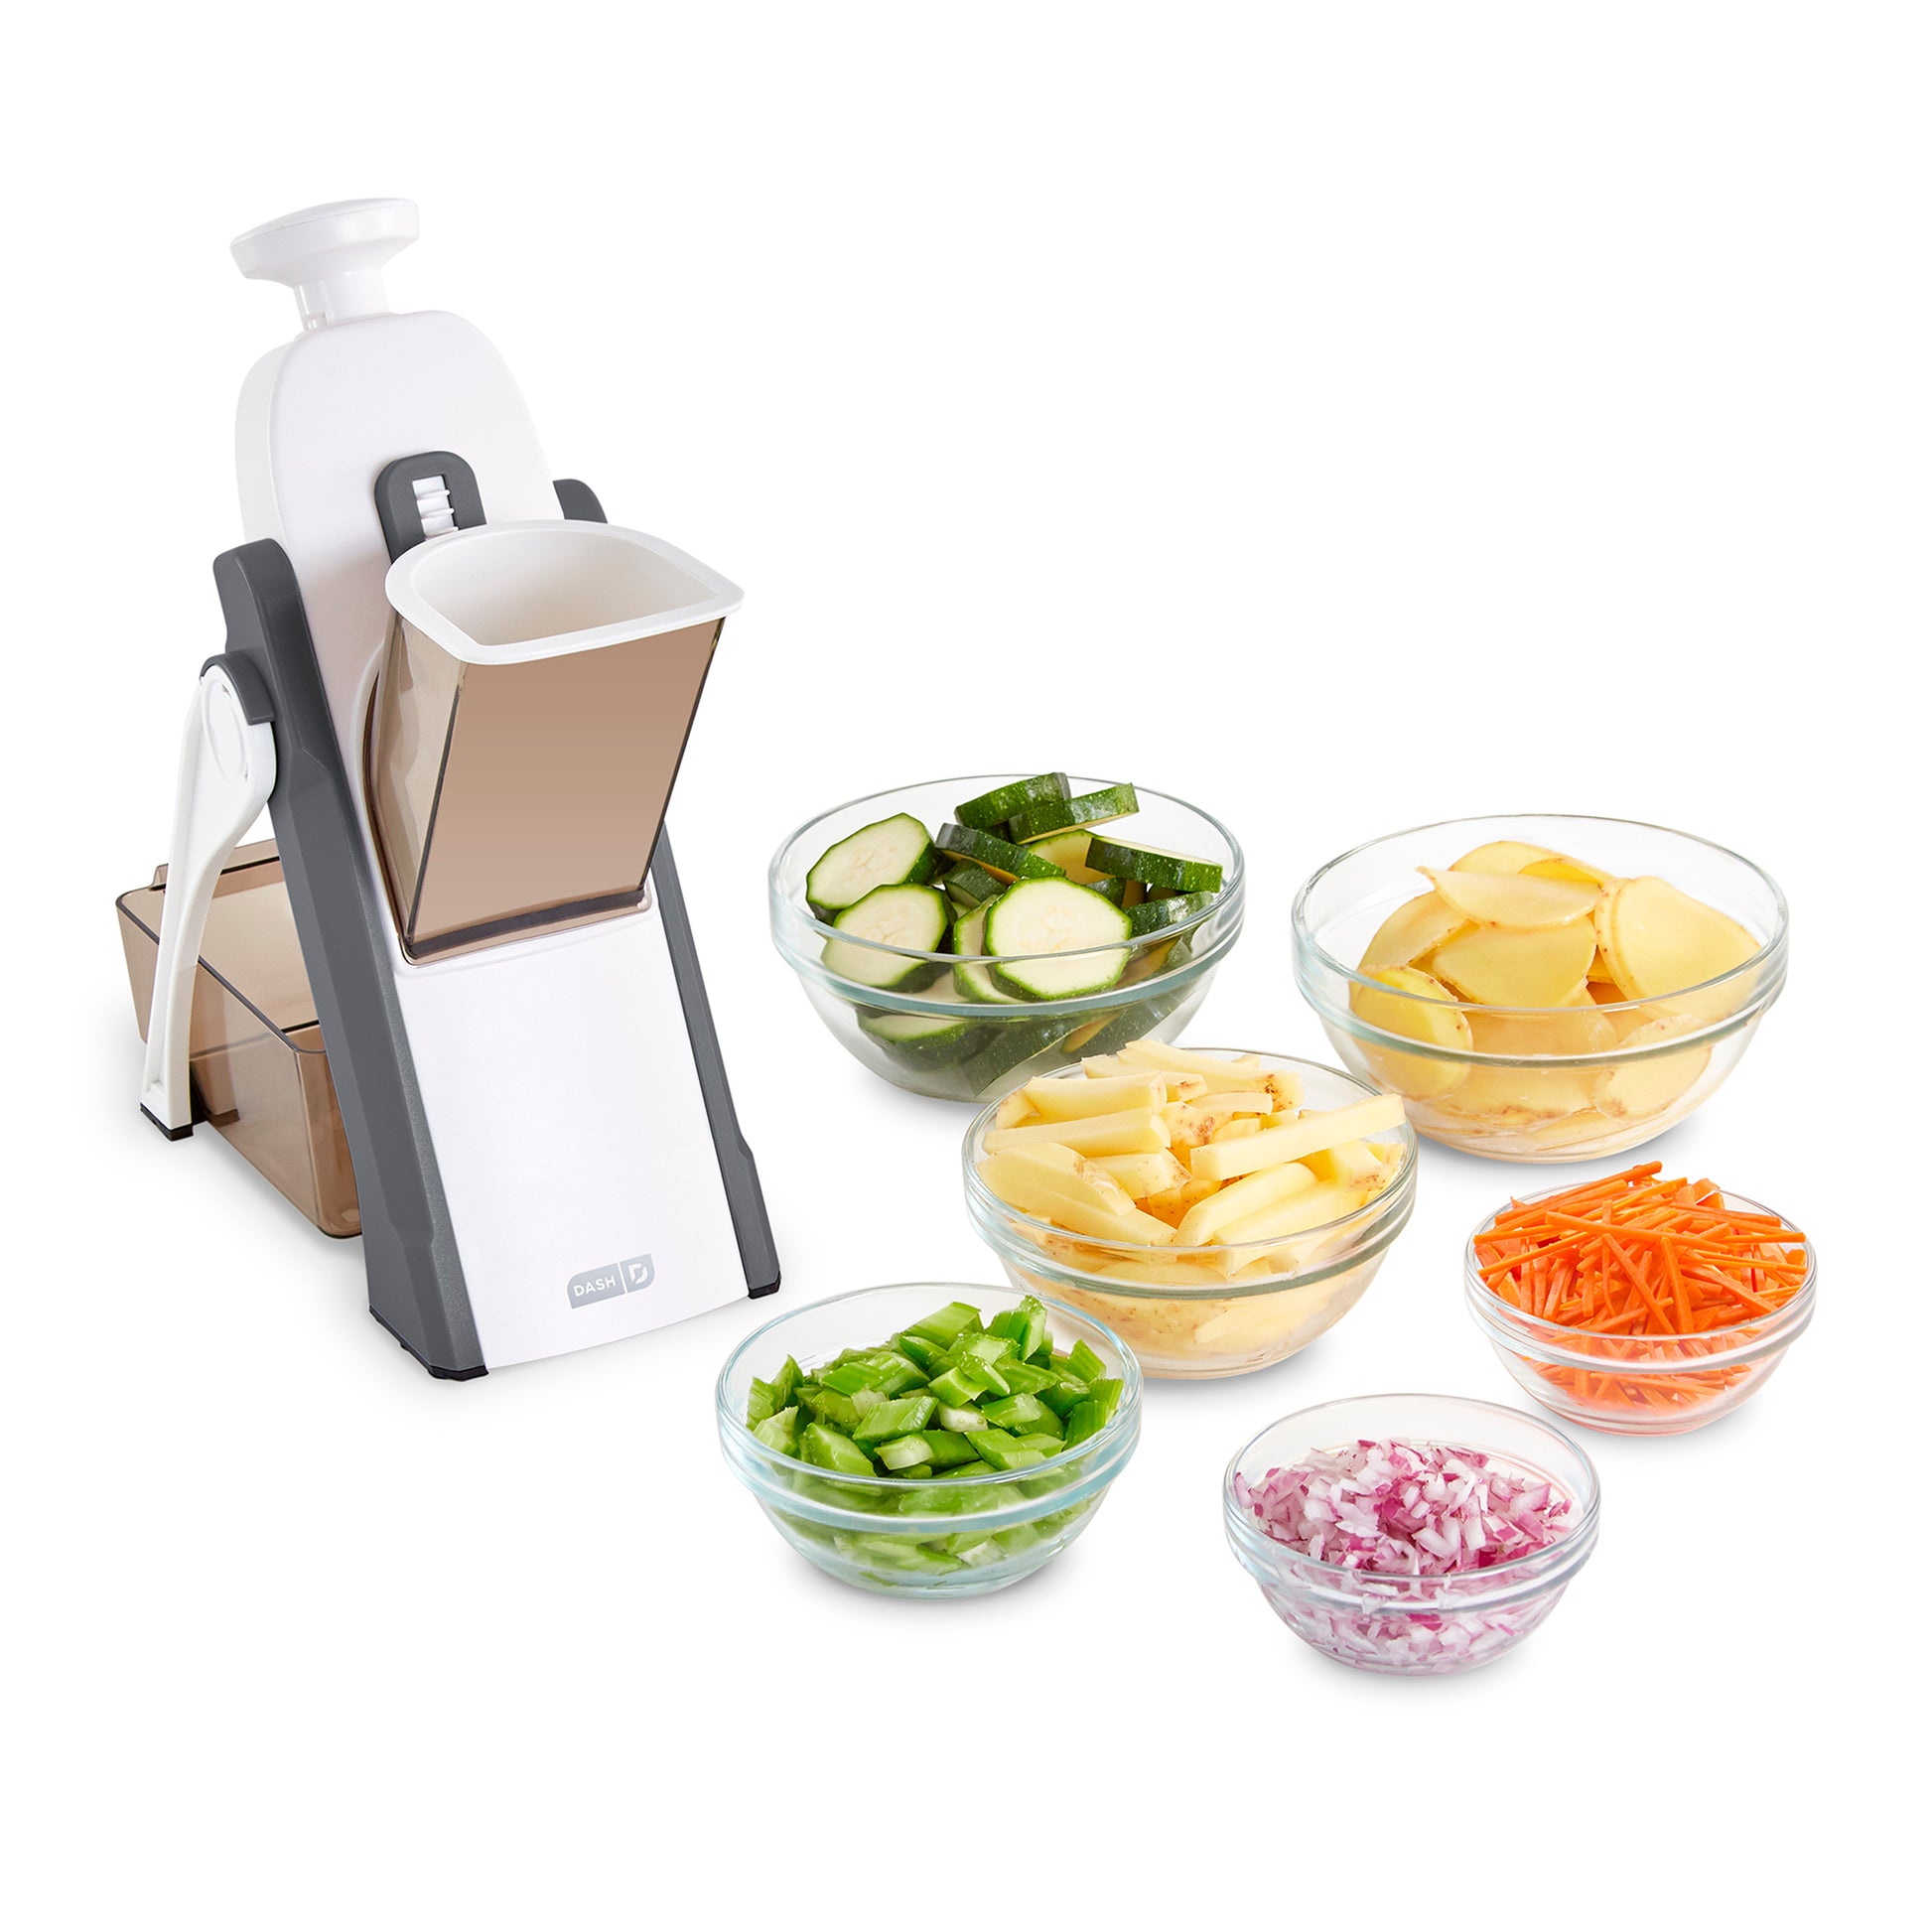 Mandoline Food Slicer (includes additional 13 attachments